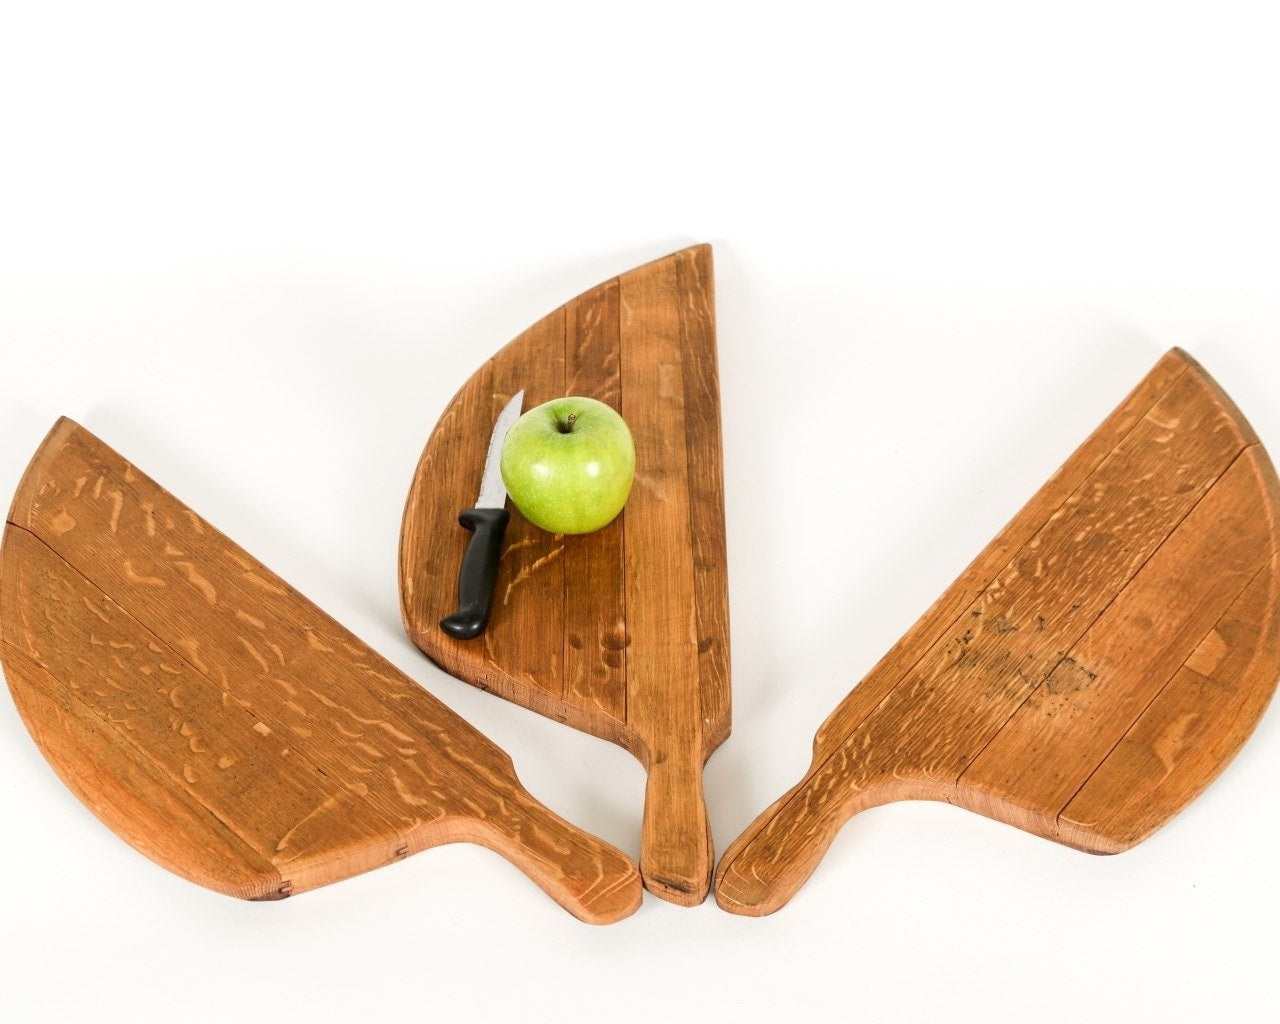 Wine Barrel Head Charcuterie or Cutting Board - Safia - Made from CA wine barrels. 100% recycled